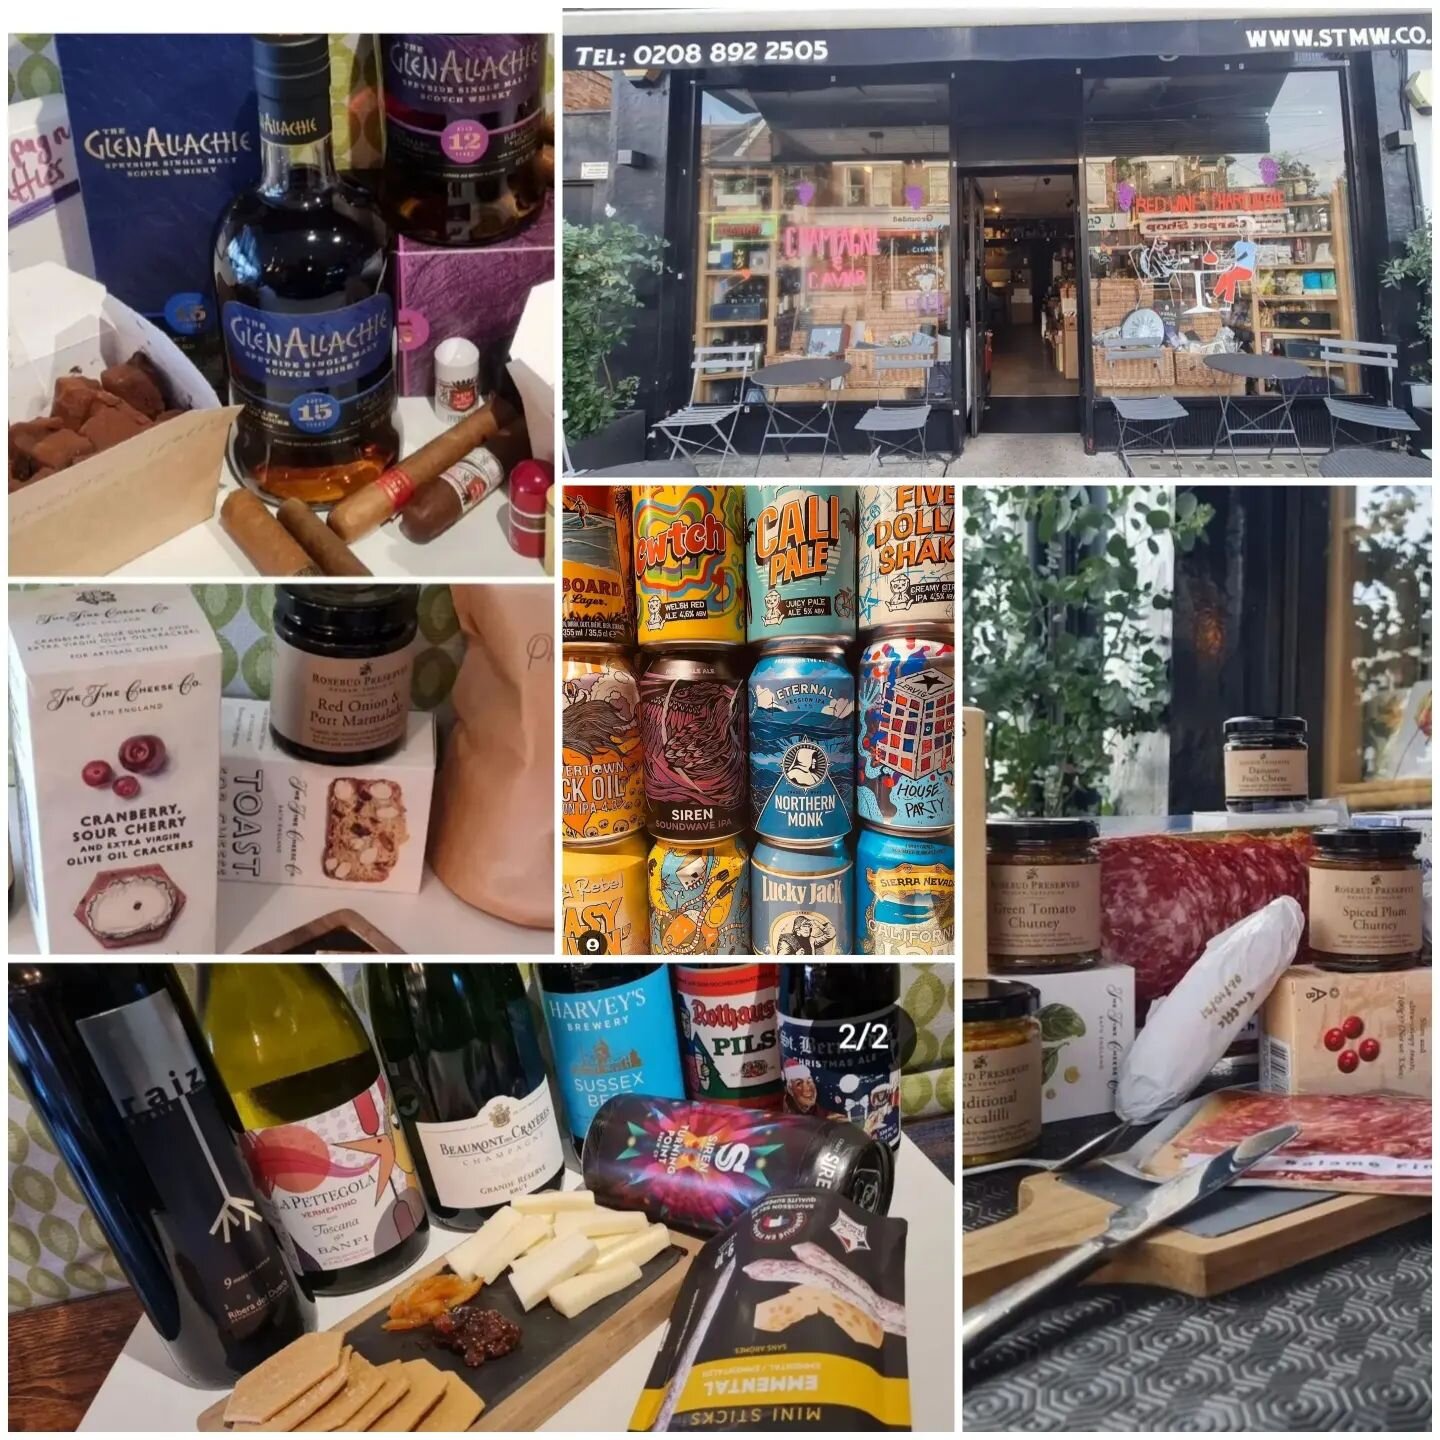 Its Rugby day today at #twickenhamstadium ..... anyone fancy some beer, wine or champagne, paired with some crackers, cheese, charcuterie &amp; chutney at St Margarets Wines, TW1 3EH (@stmargaretswines )
.
#twickenhamstadium #twickenhamstudios
#stmar